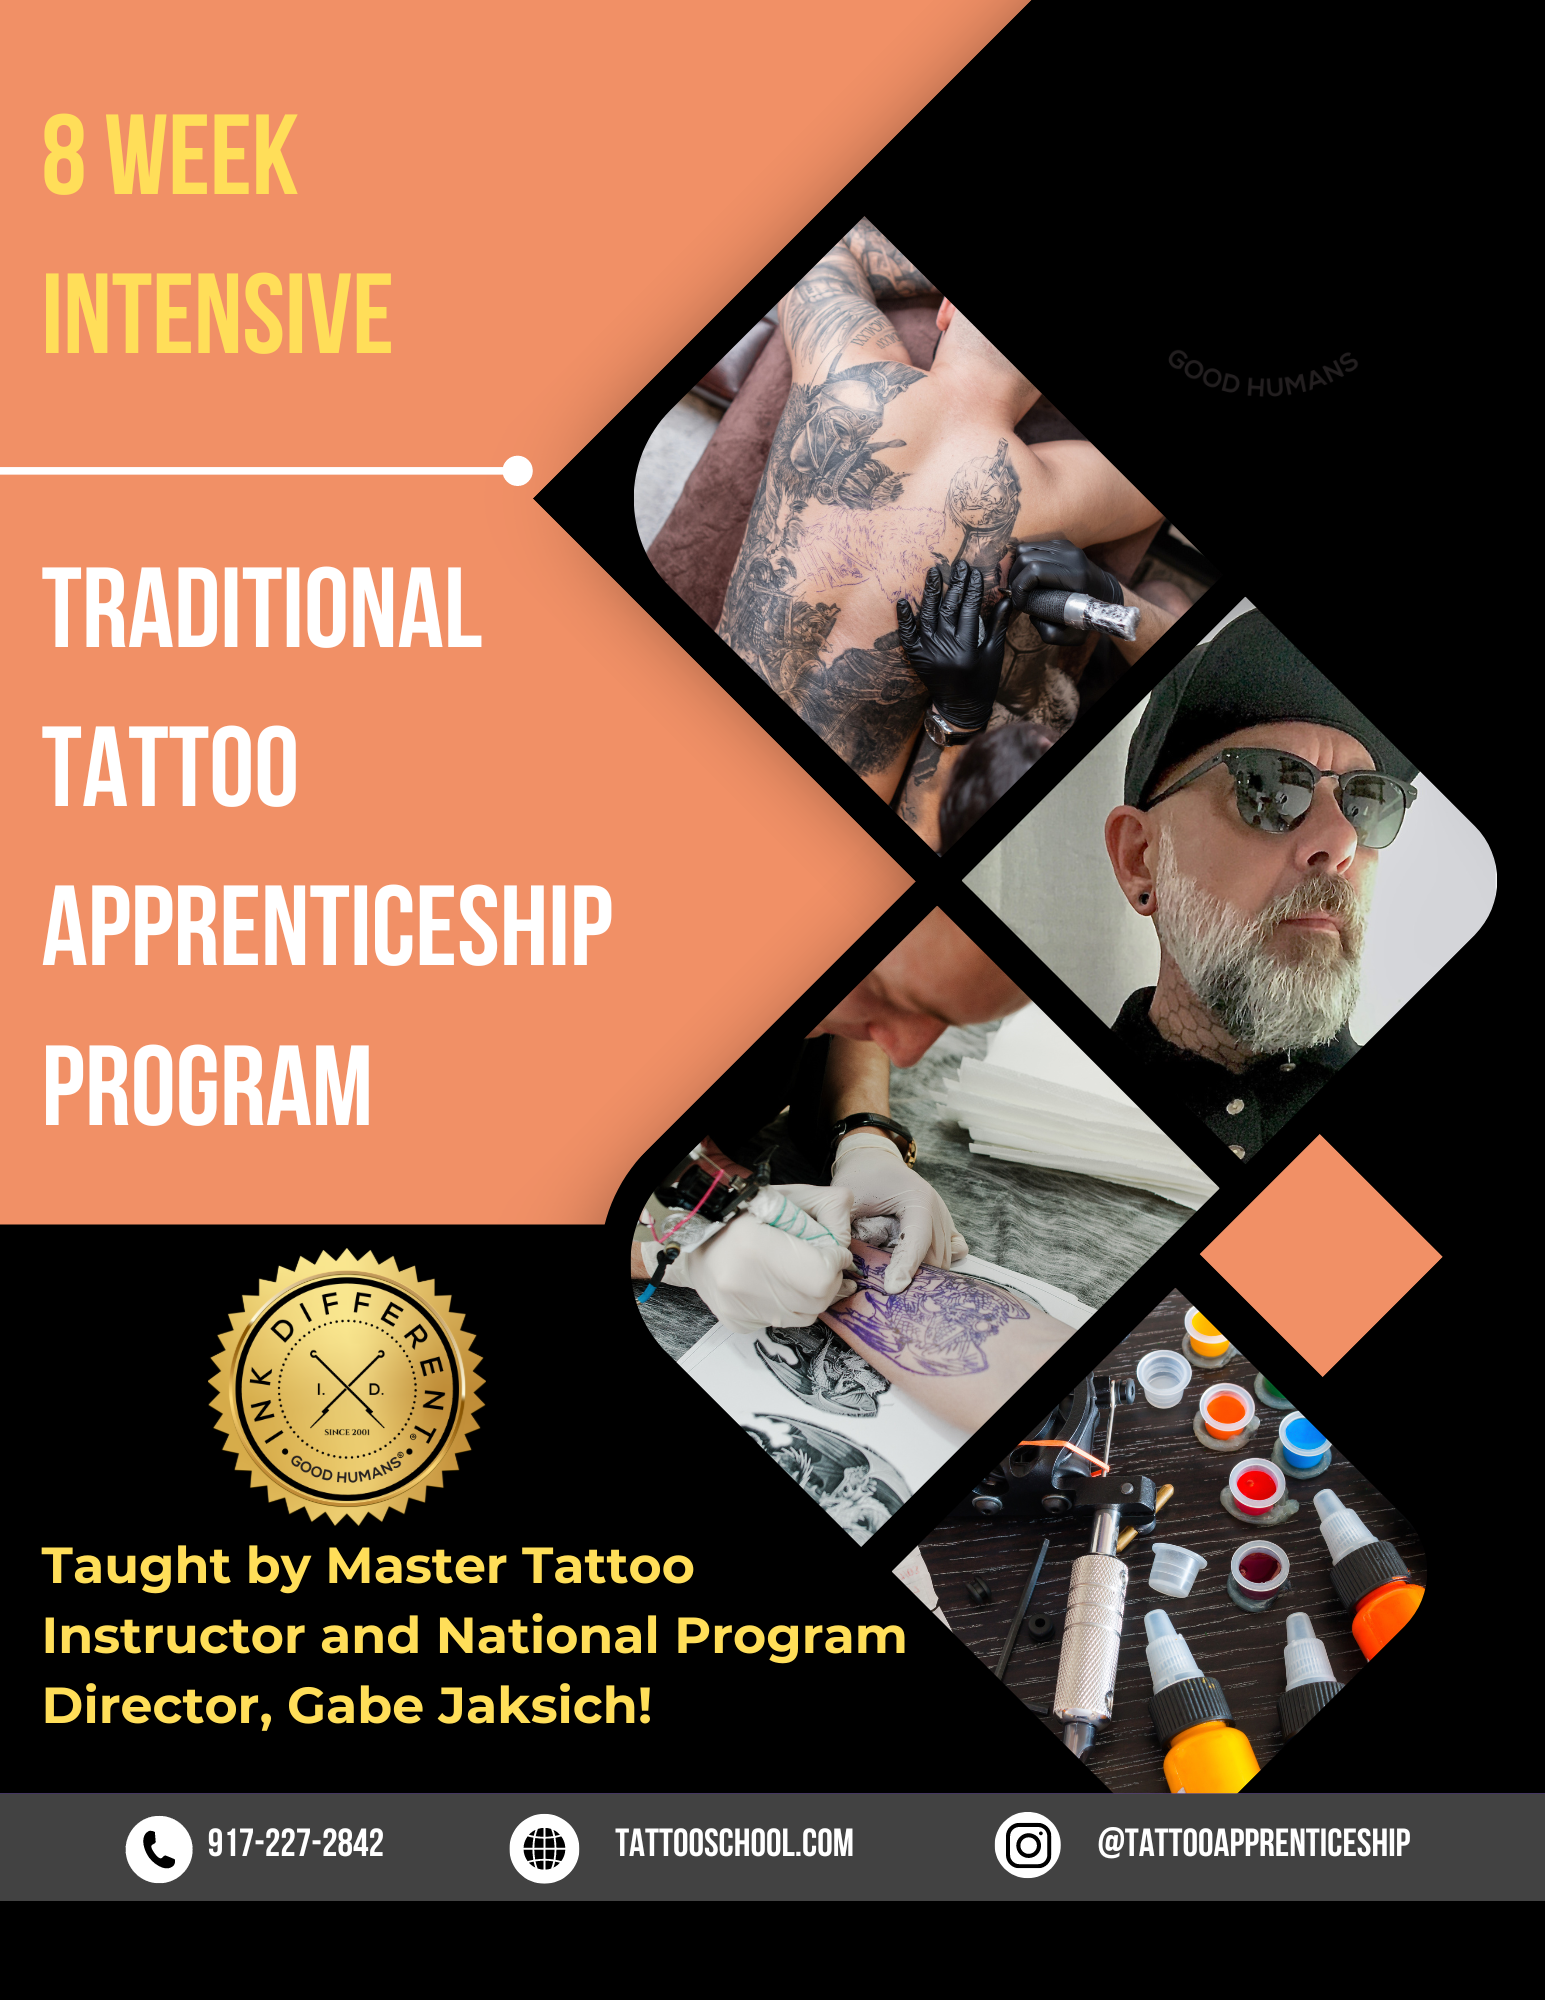 Exploring Artistry: Gabe Jaksich's 8-Week Traditional Tattoo Apprenticeship Program at Ink Different Tattoo School in Miami